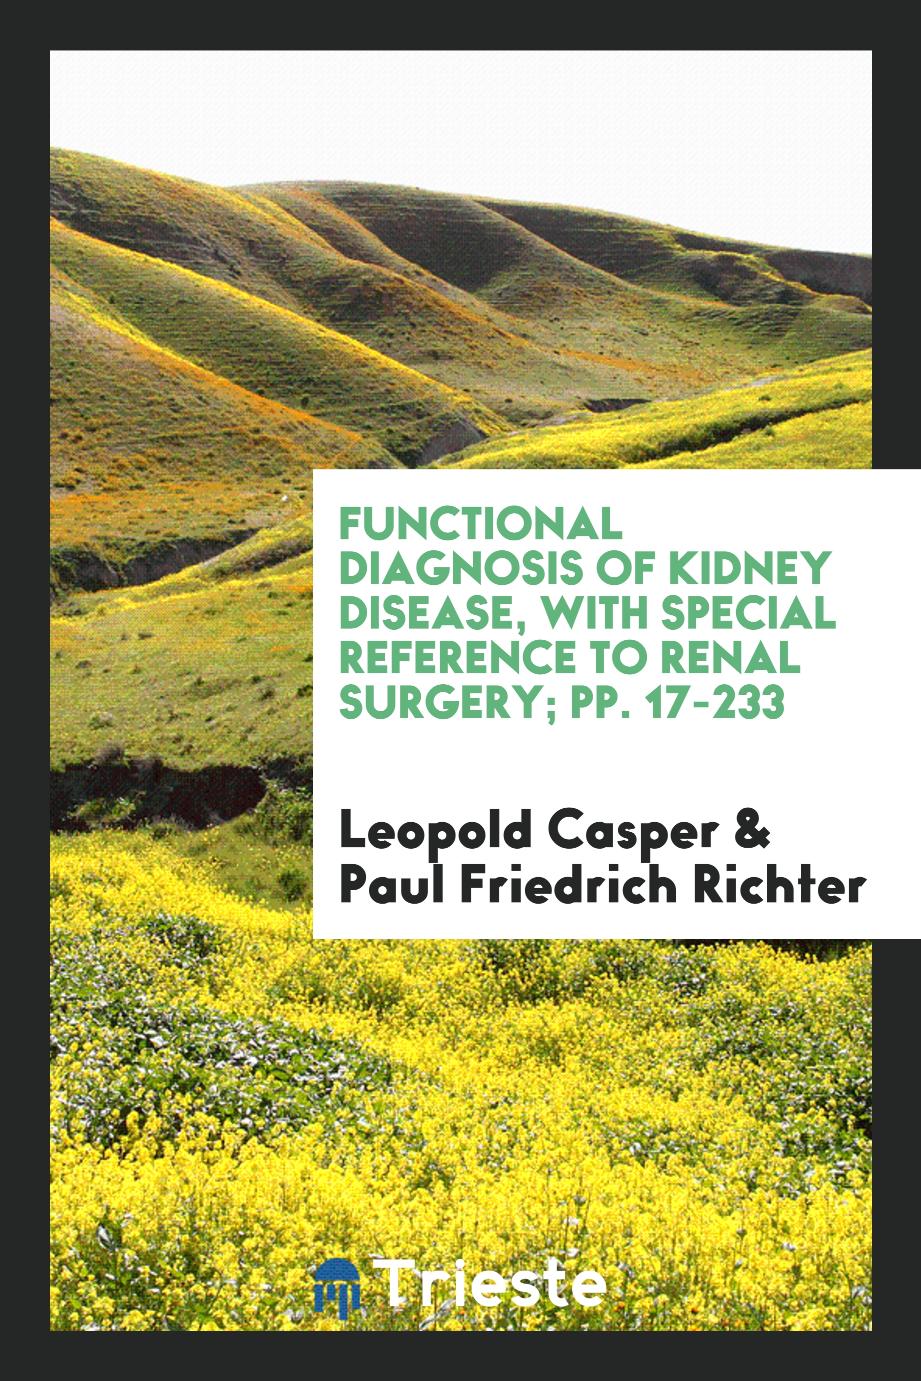 Functional diagnosis of kidney disease, with special reference to renal surgery; pp. 17-233